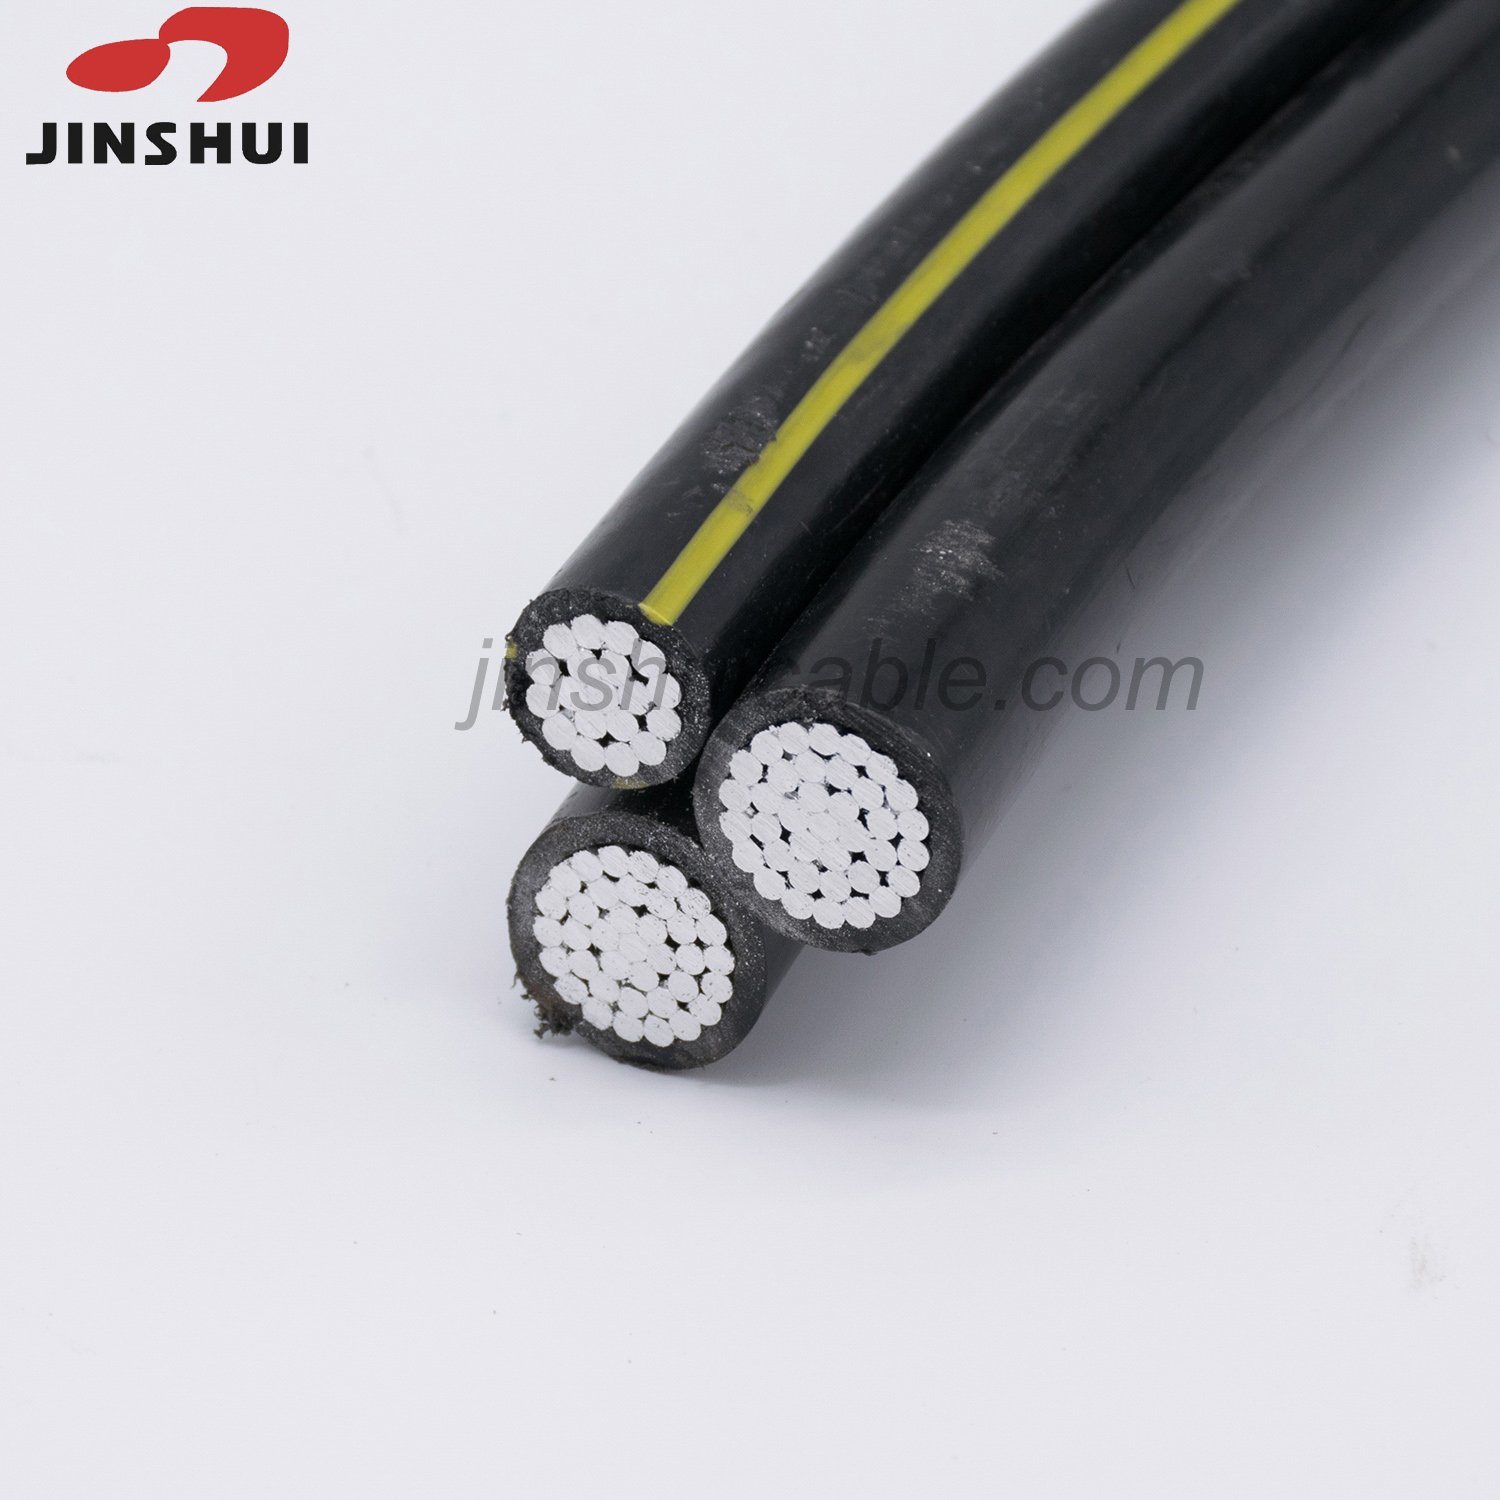 Aerial Bundled Cable 0.6/1kv Voltage Overhead Electric Cable